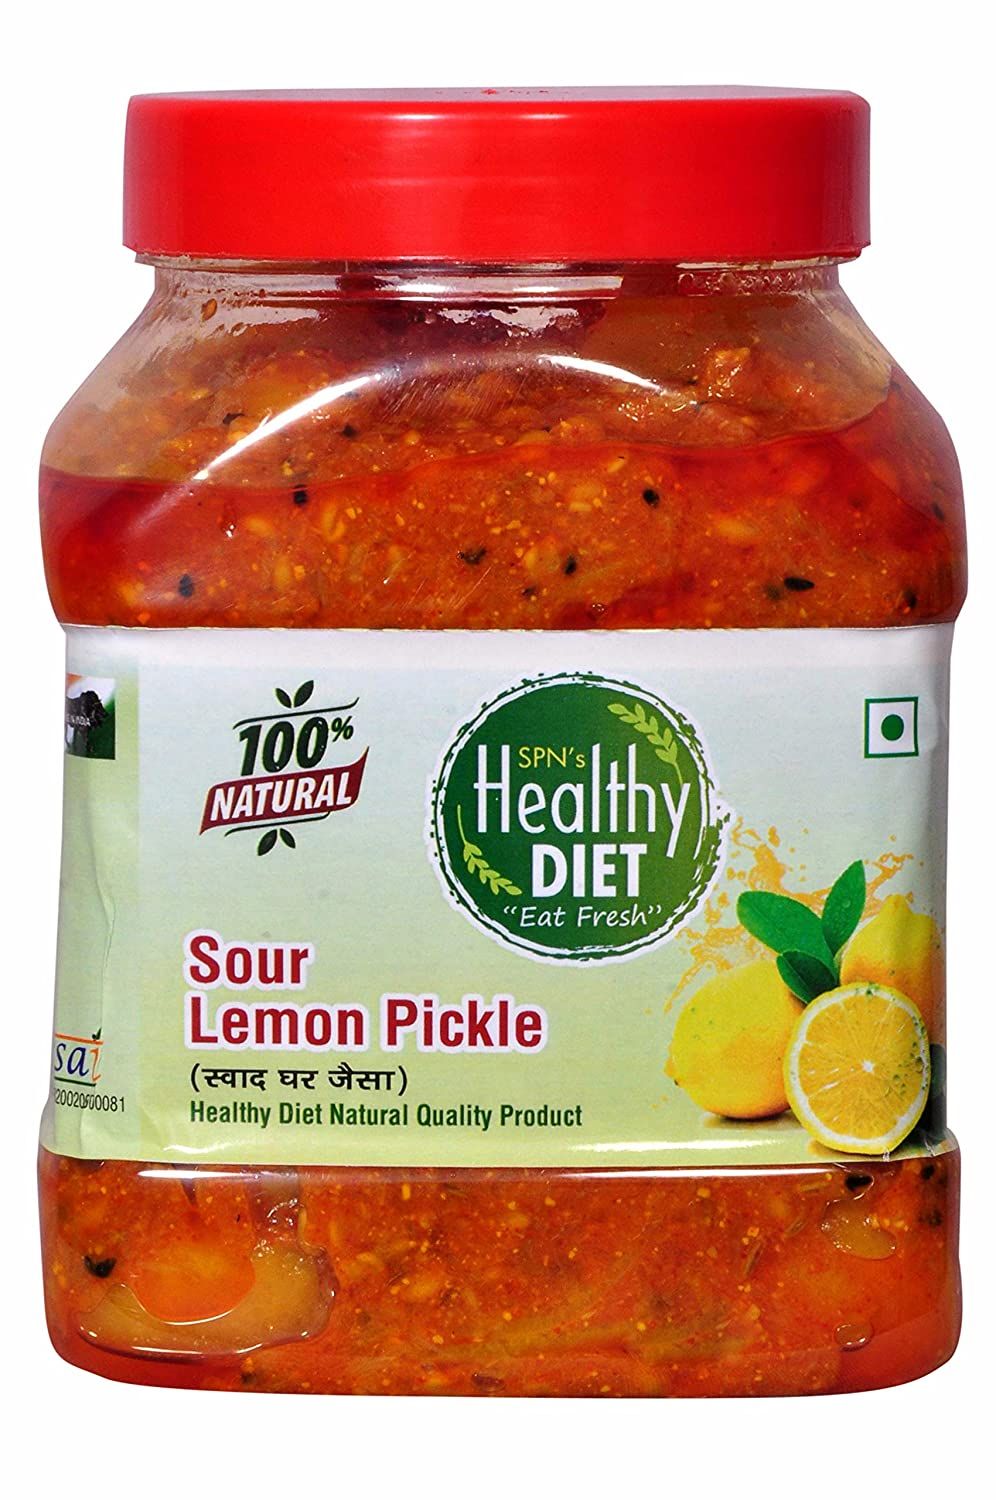 Healthy Diet Homemade Mother Made Organic Lemon Pickle Image